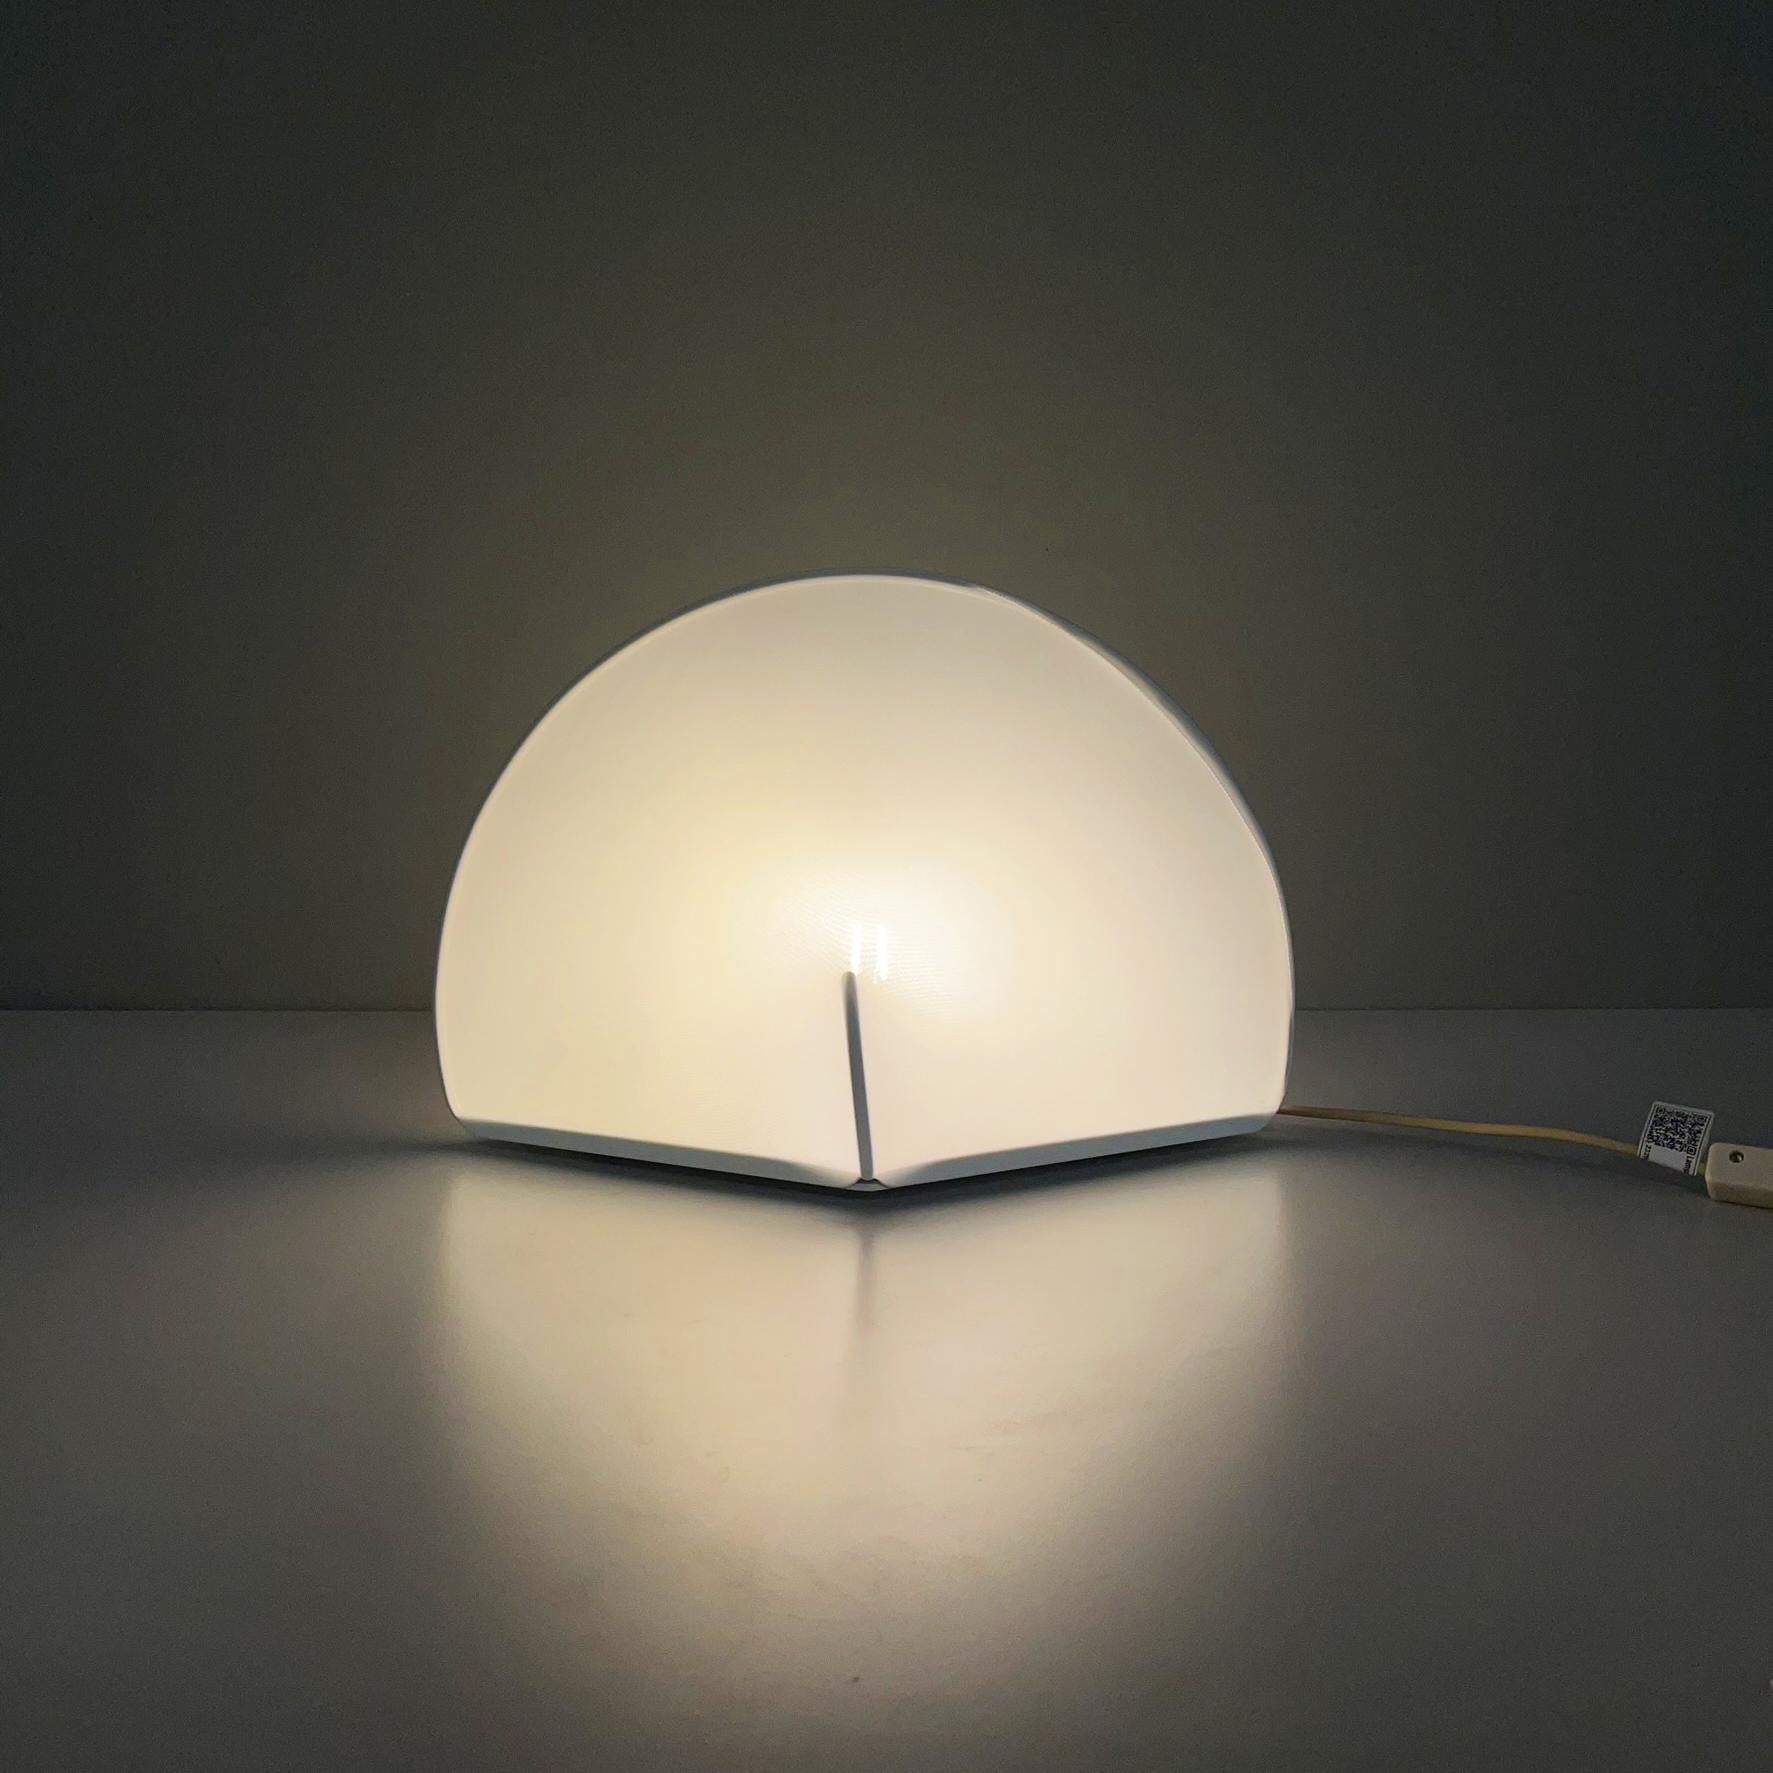 Italian modern table lamp mod. Kaori 2 by Kazuhide Takahama for Sirrah, 1970s.
Table or bedside lamp mod. Kaori 2 with rhomboidal base in white metal. The structure is composed of a metal arch. The lampshade is made of white stretch jersey fabric,